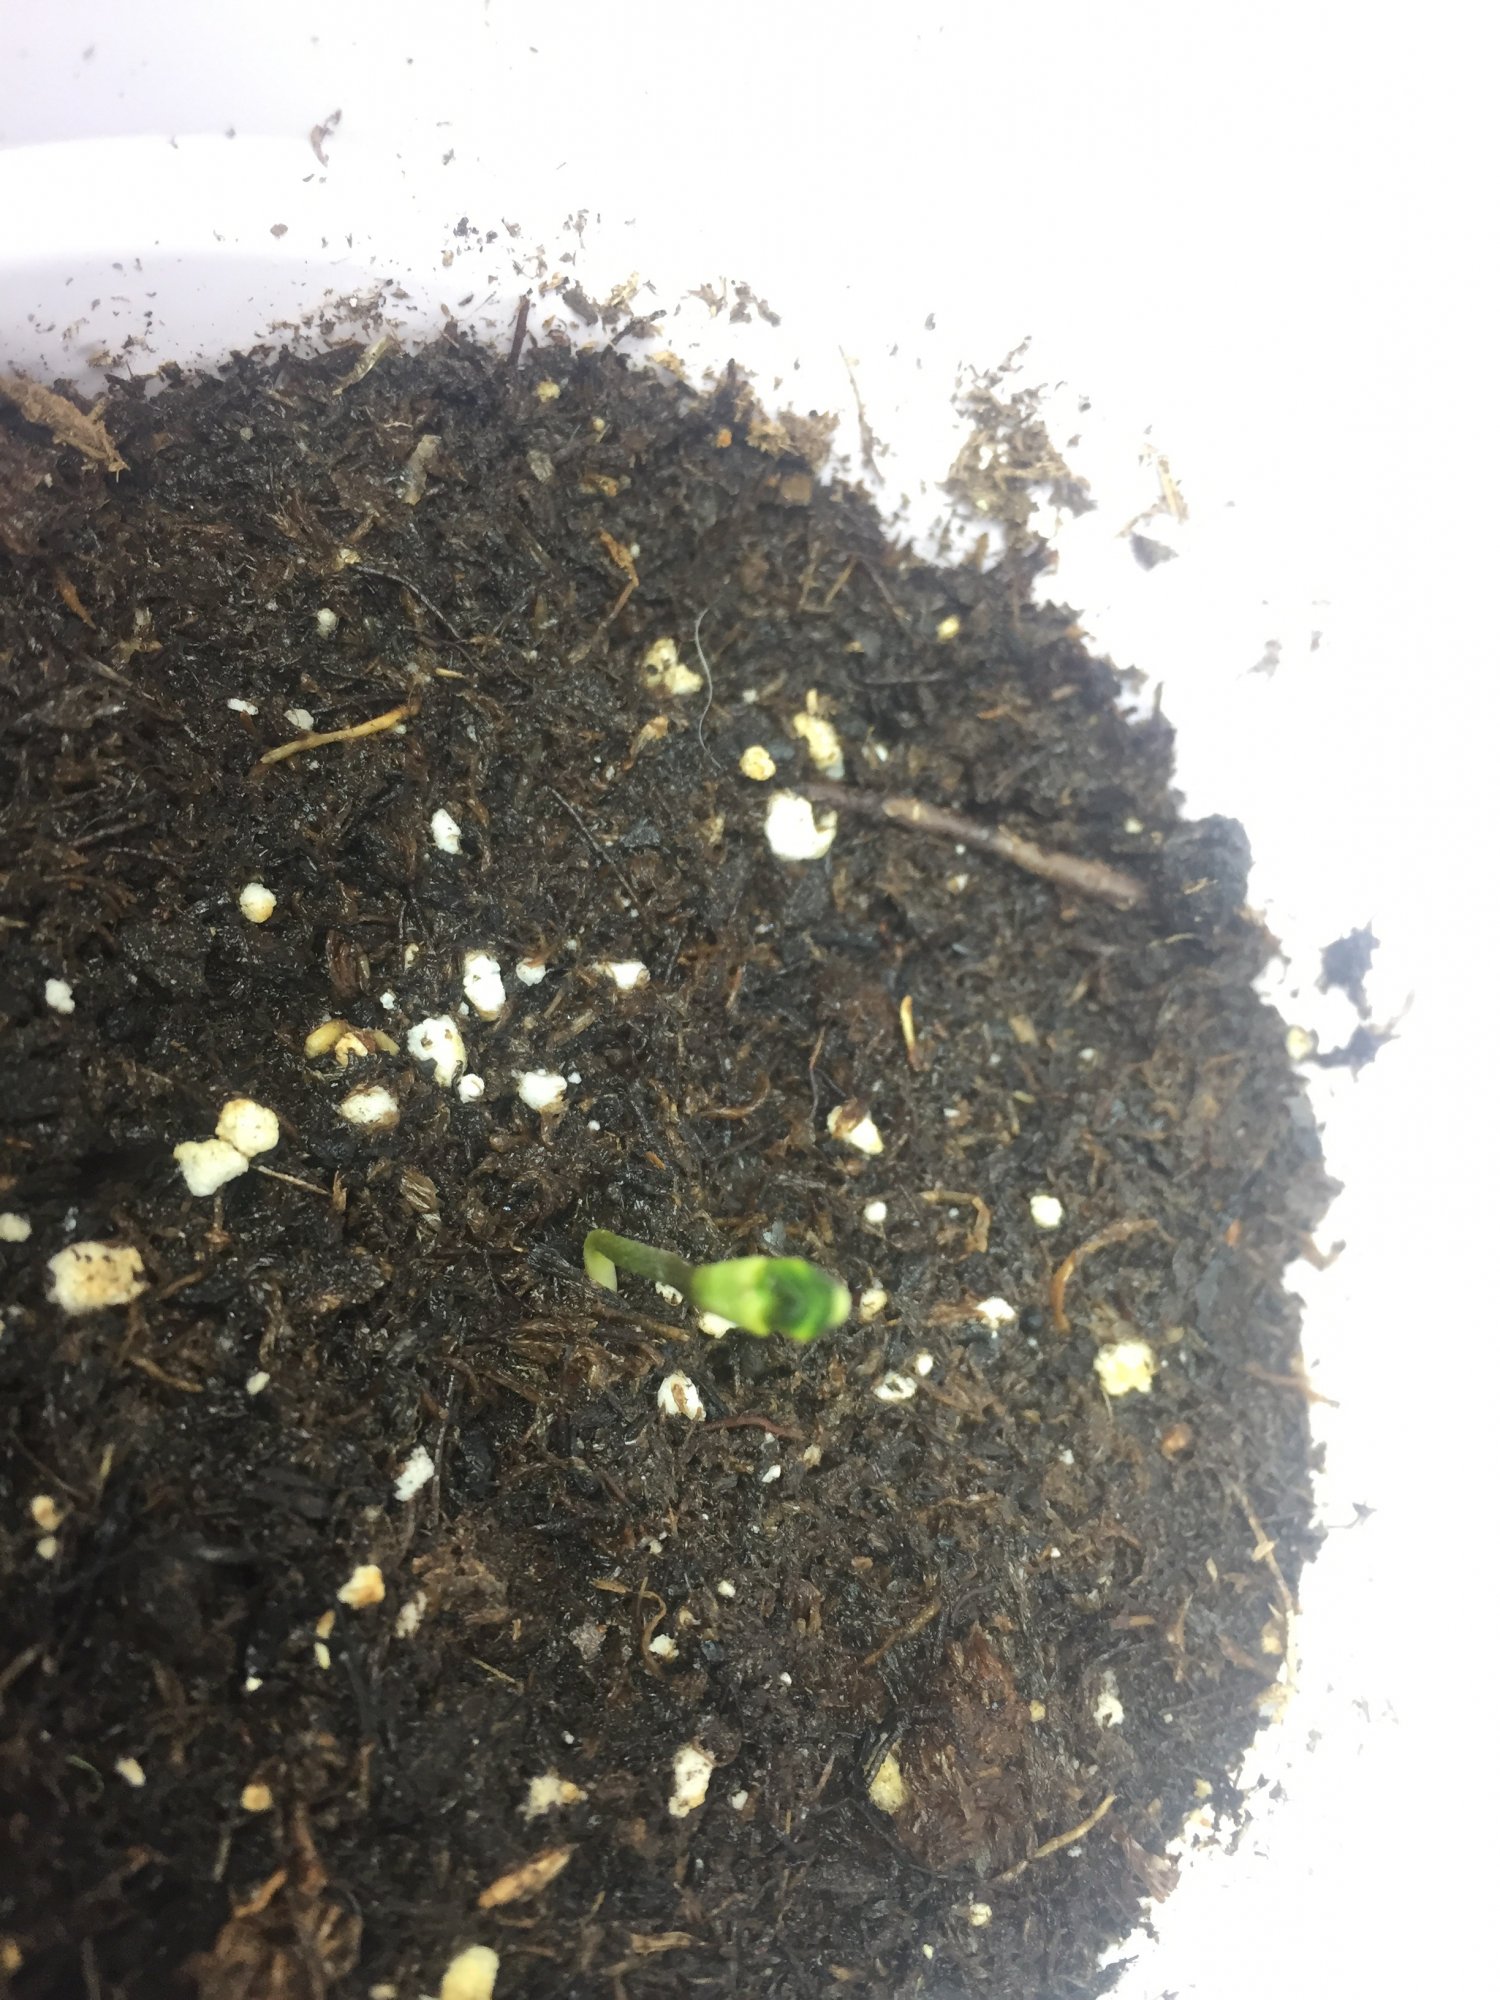 Sos seed cap fell off early